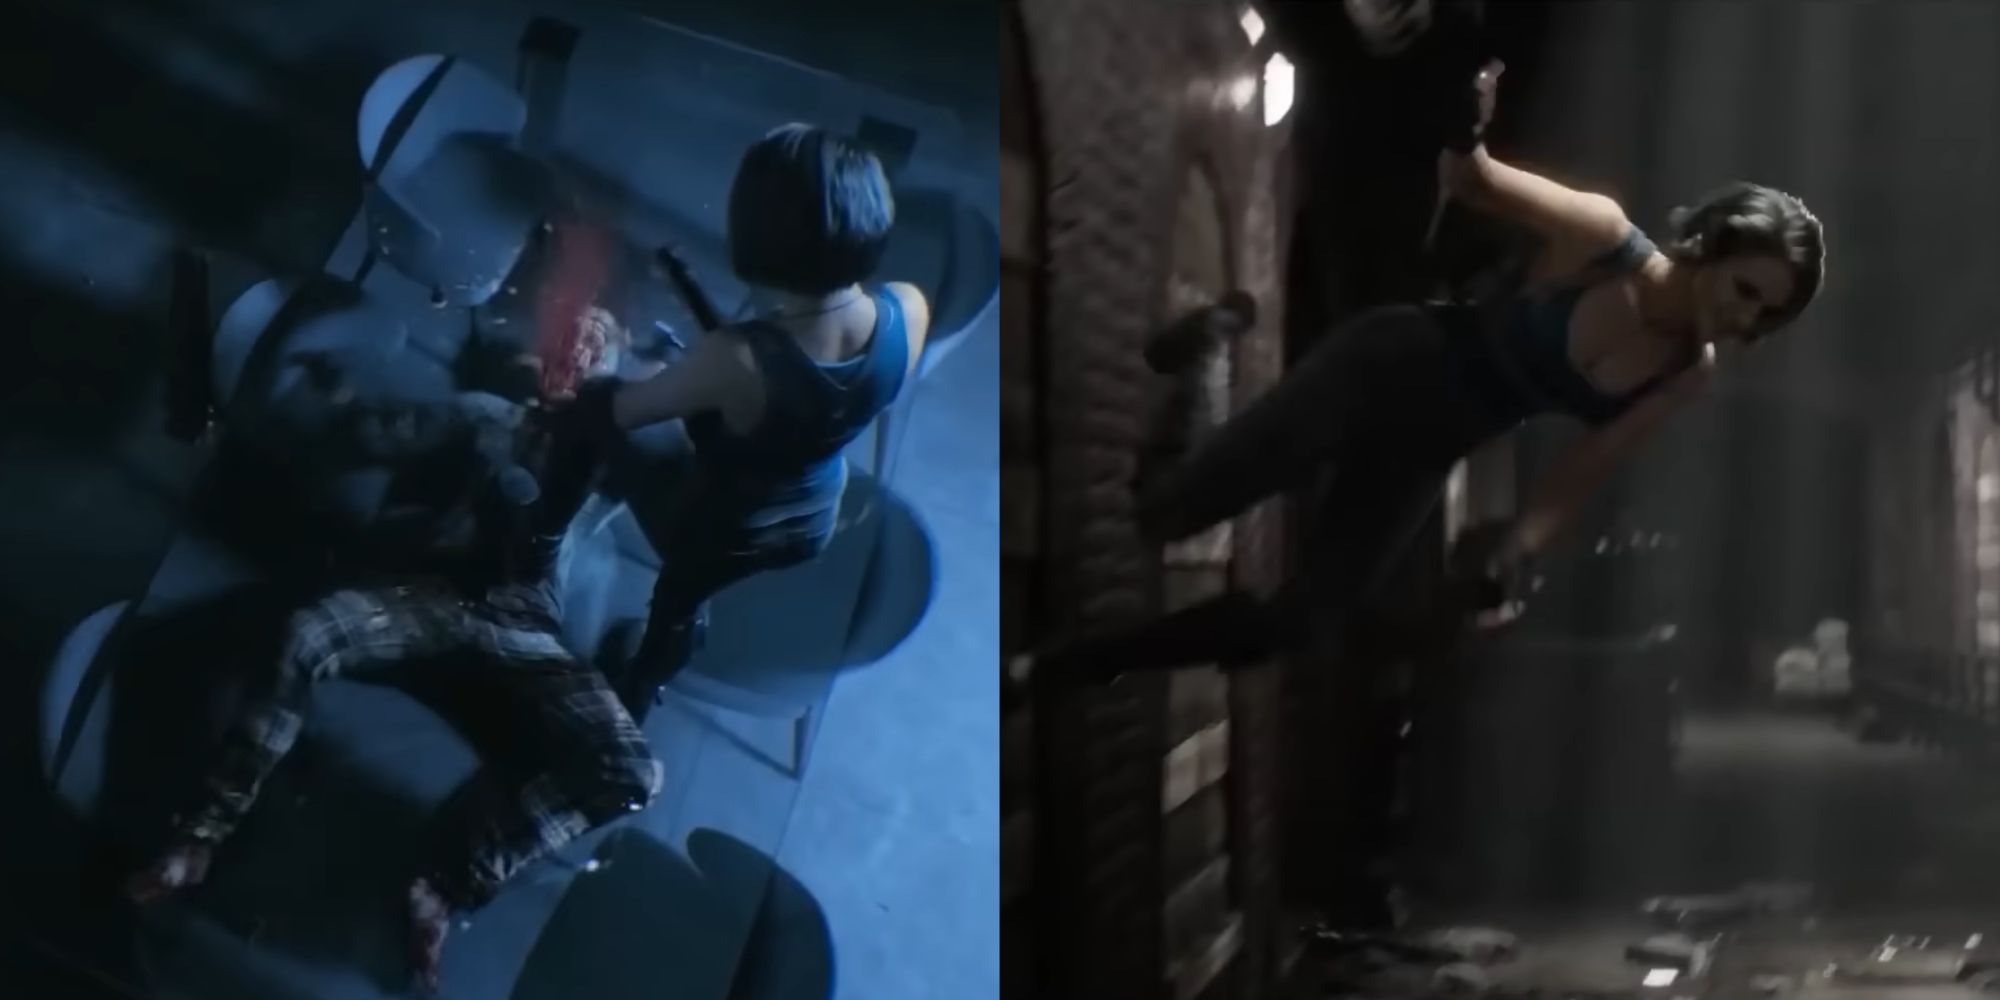 Split images of Jill standing on a table and zombies shooting and Jill wall running in the trailer.